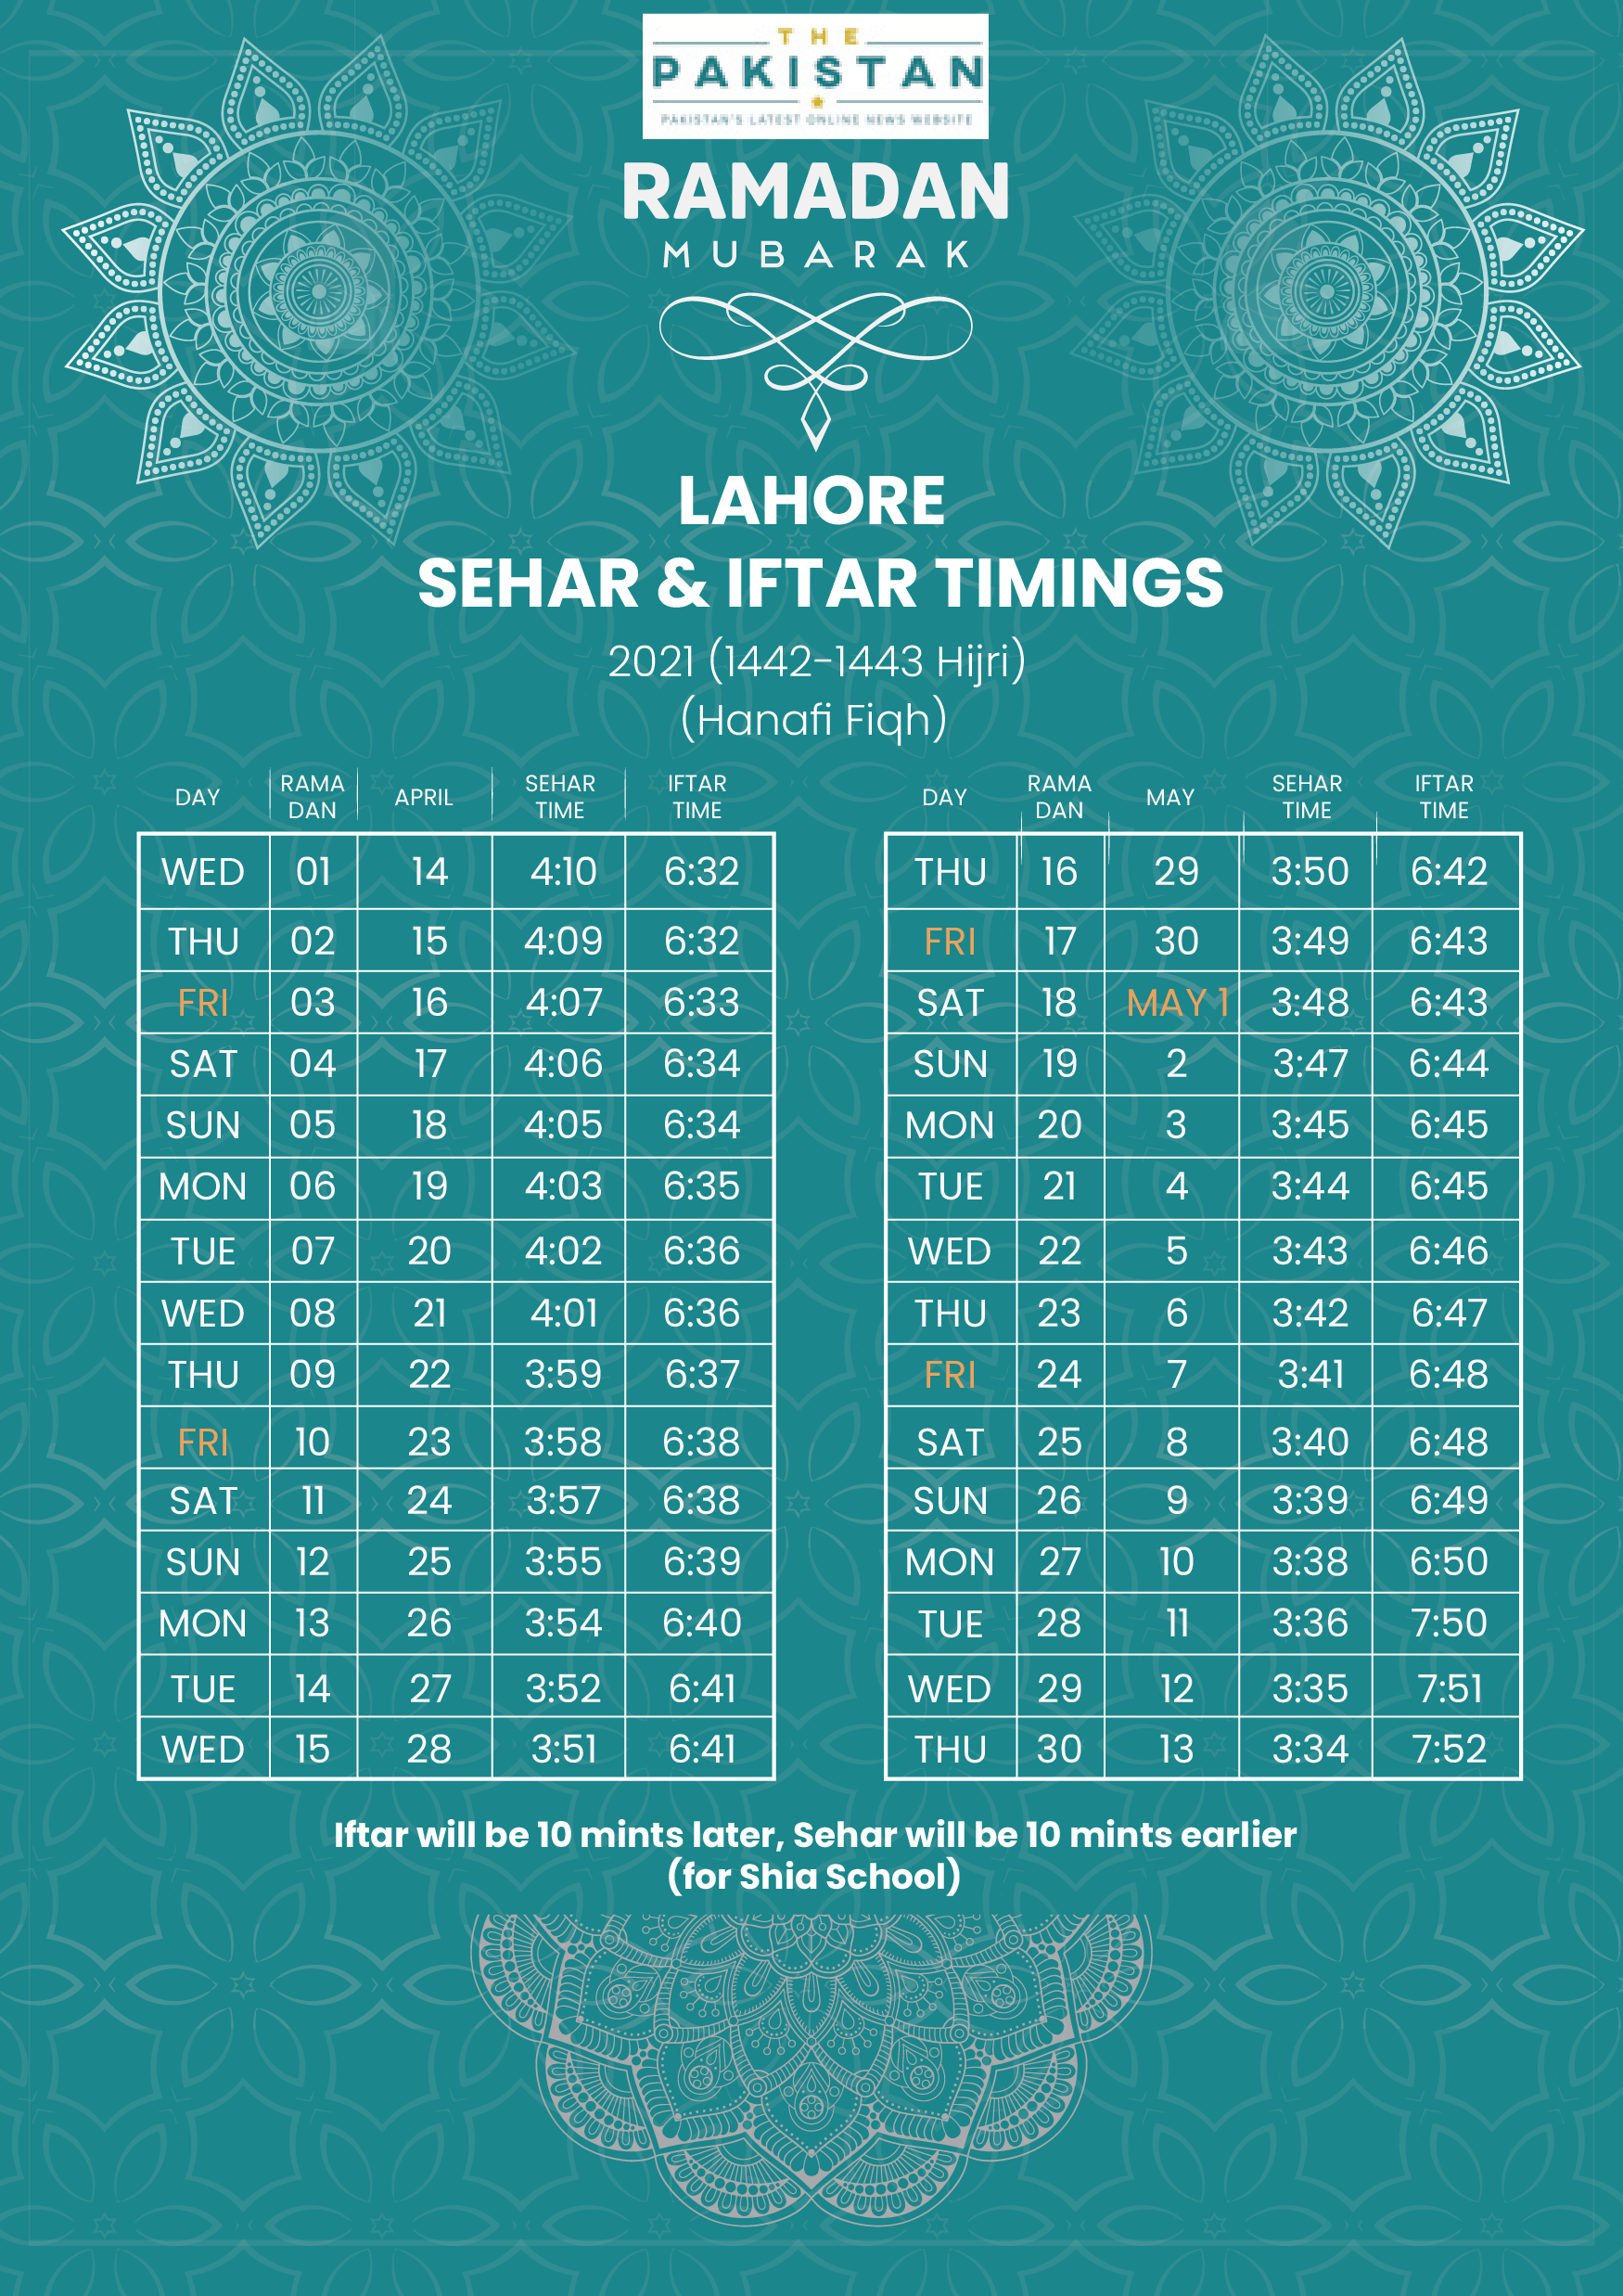 SEHRI & IFTAR TIME - LAHORE